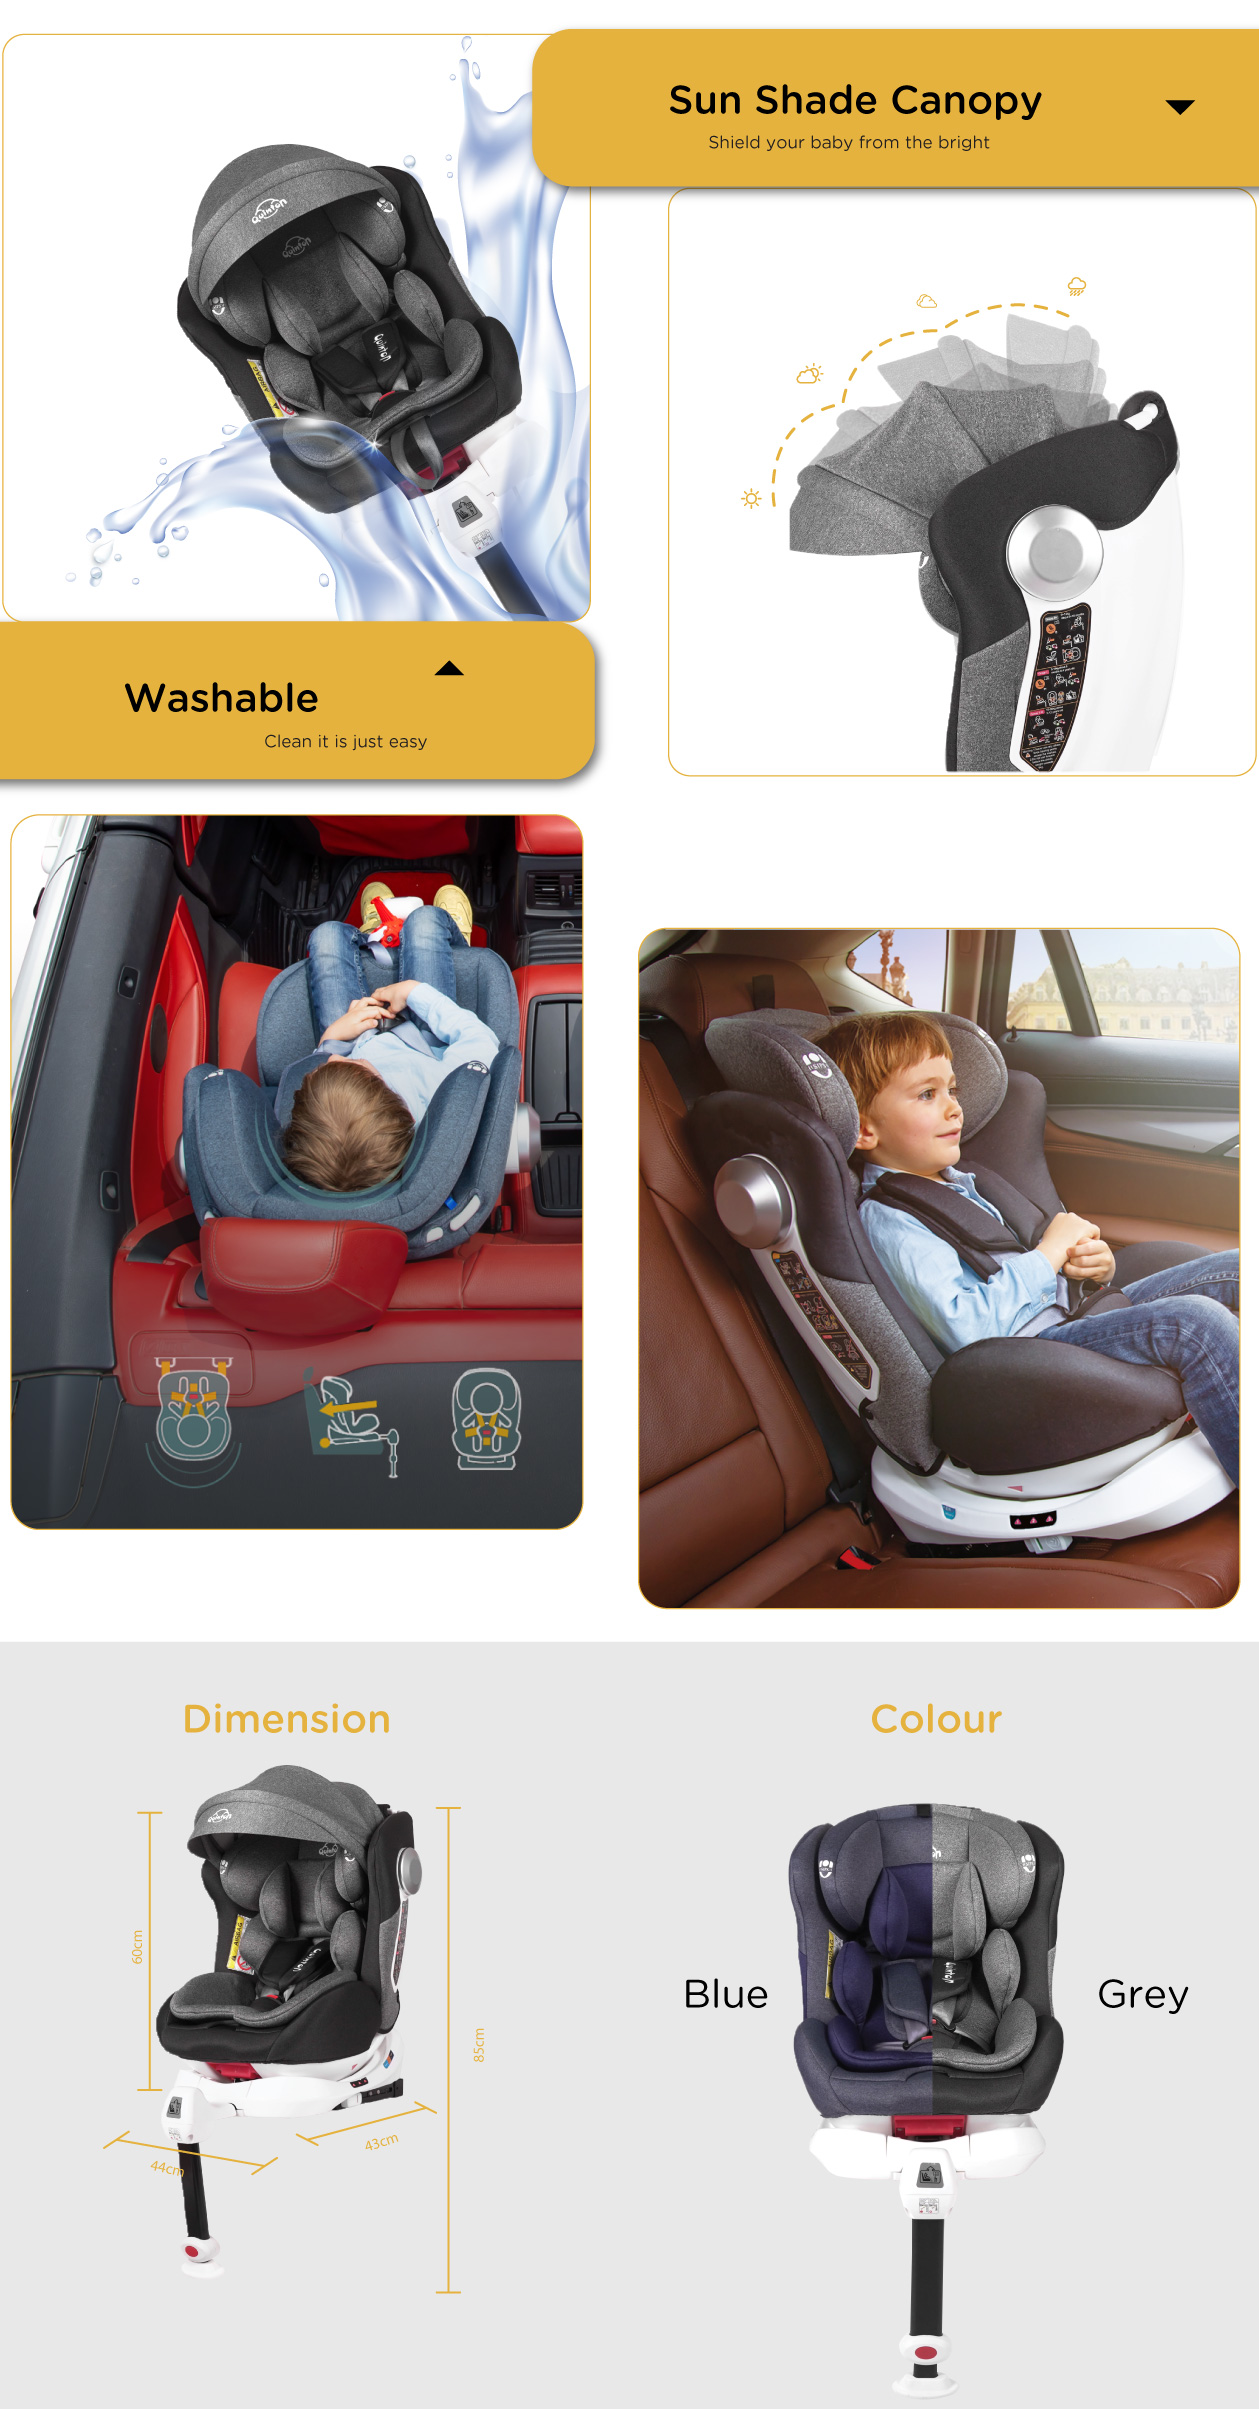 quinton baby one spin 360 rotating convertible safety car seat 宝宝儿童汽车安全座椅